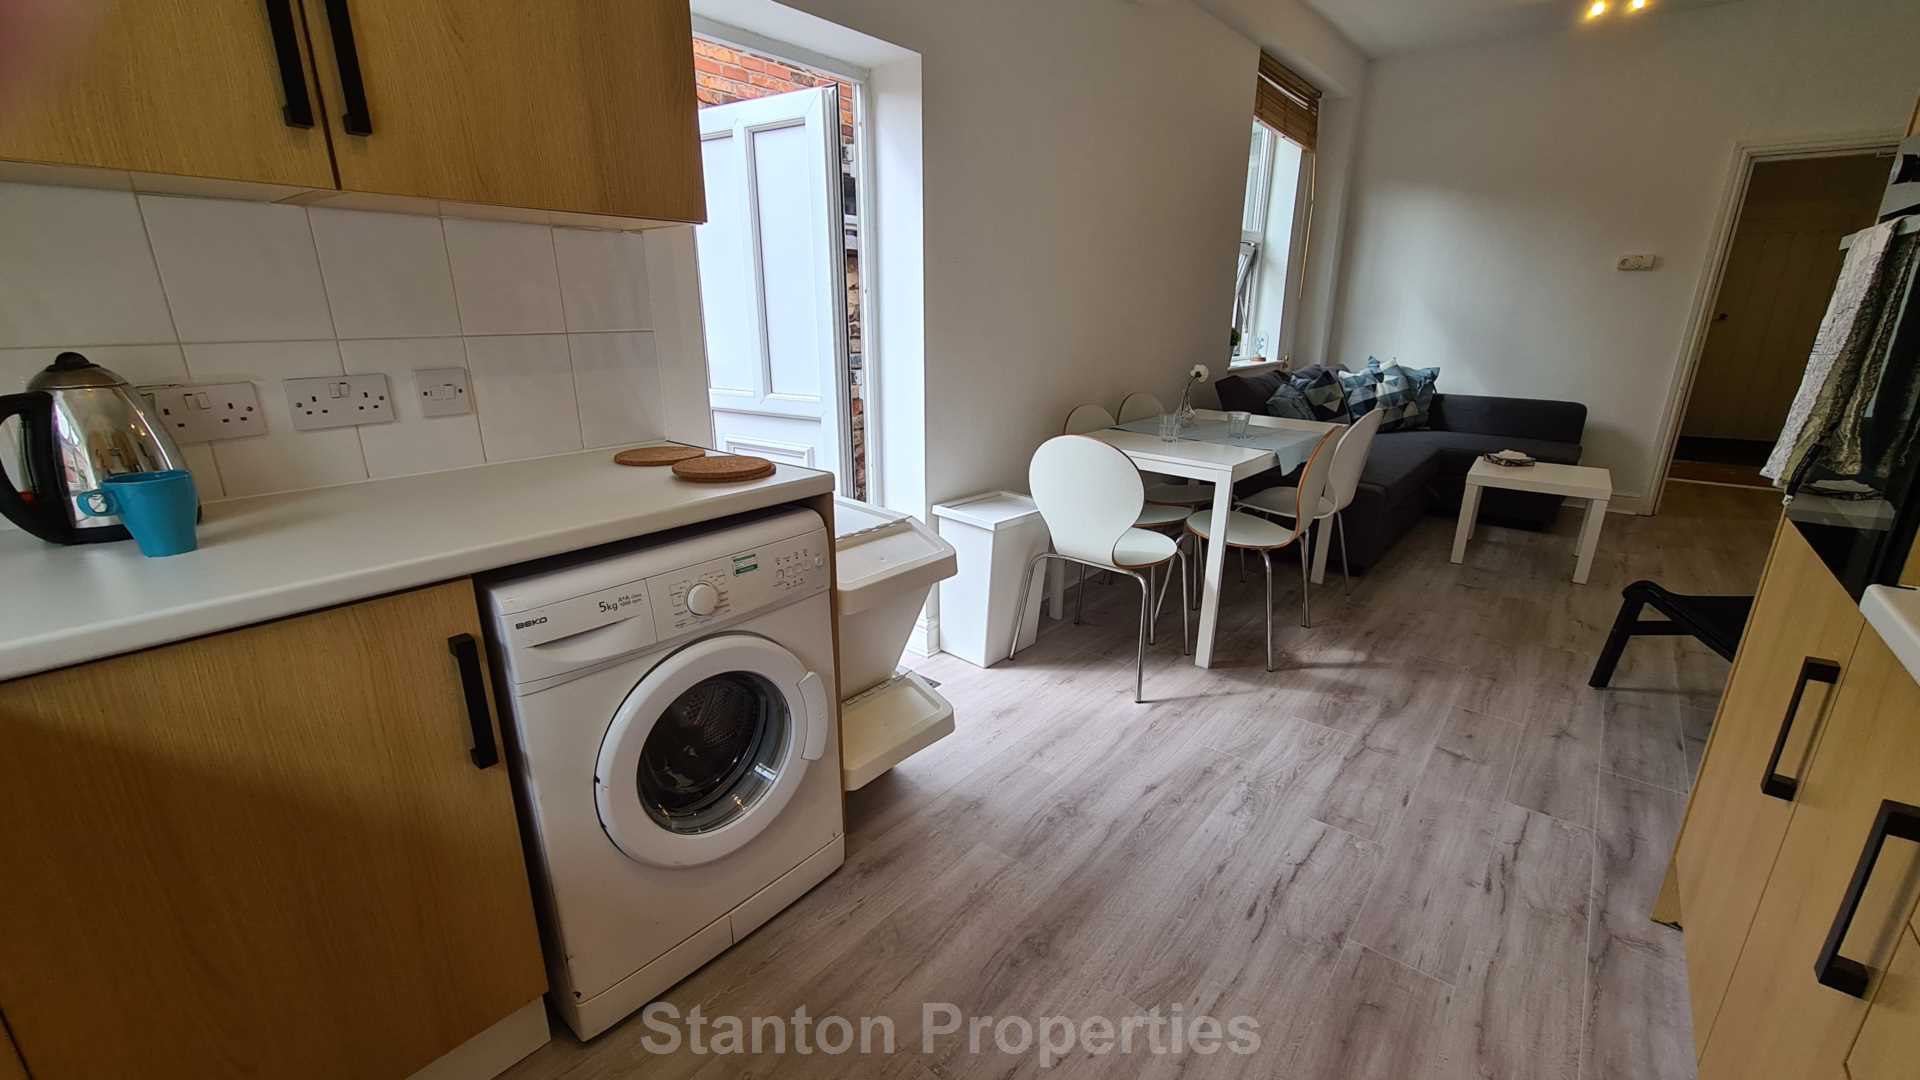 £120 pppw, See Video Tour, Mabfield Road, Manchester, Image 2